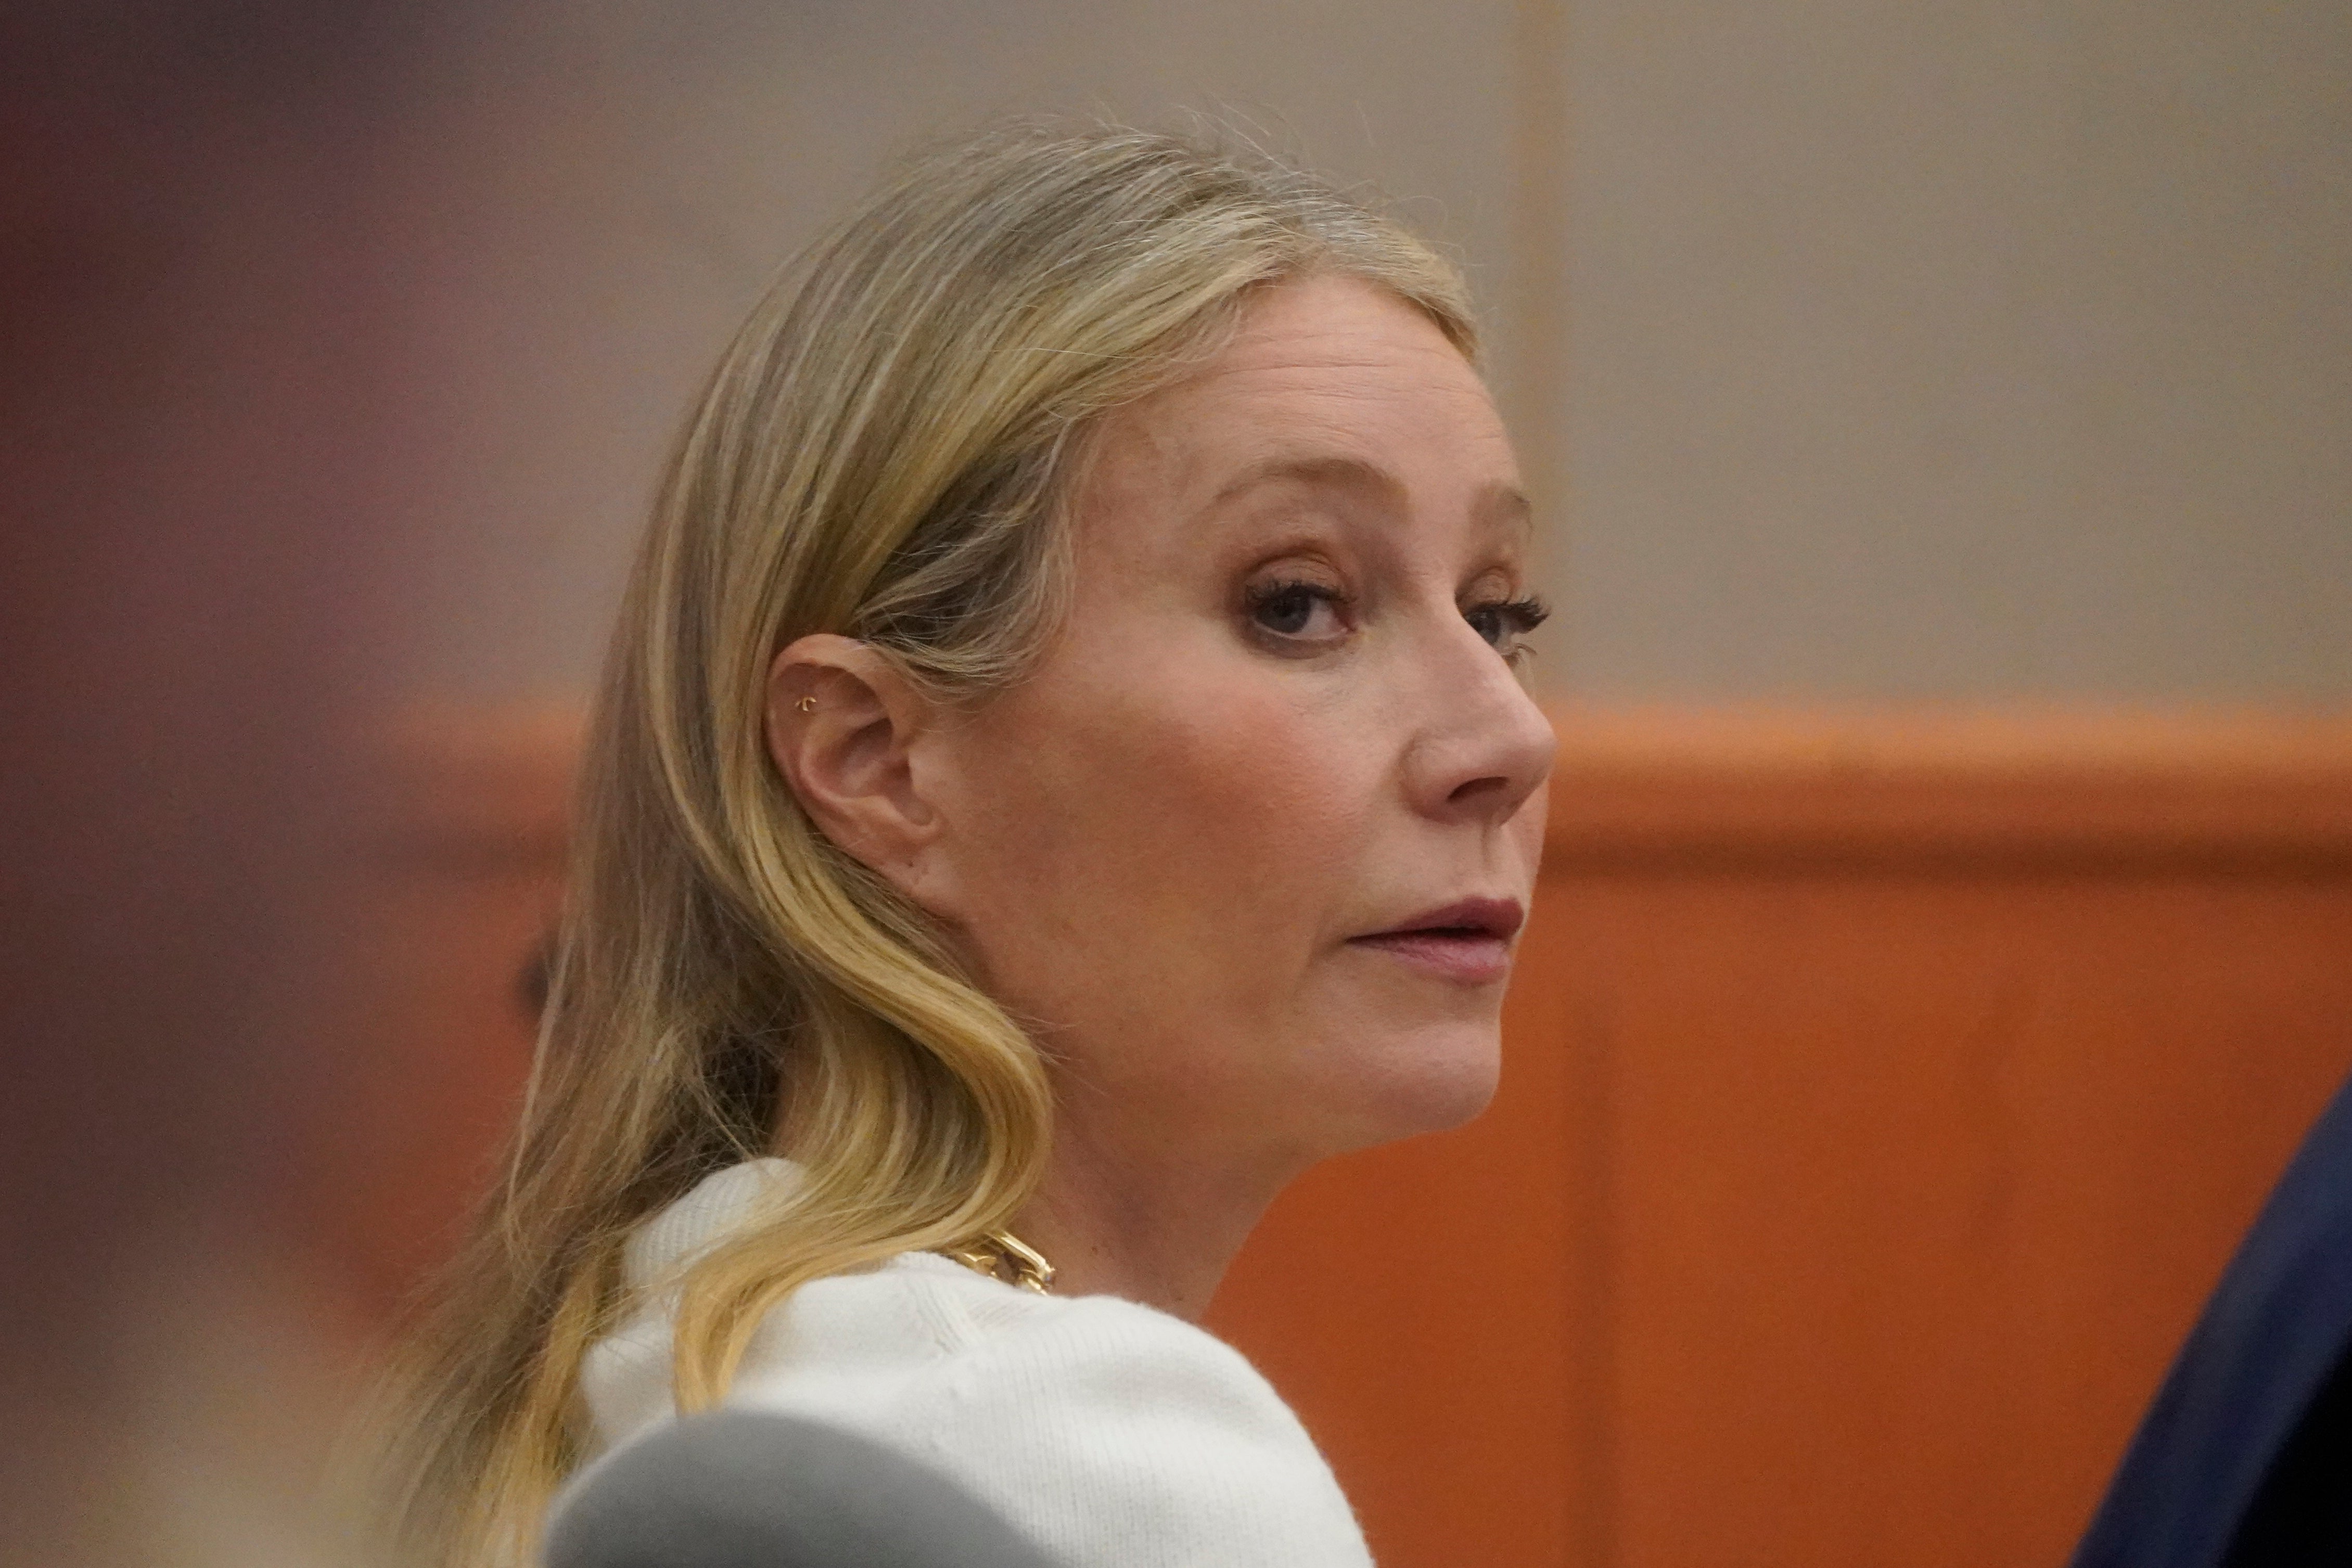 Actor Gwyneth Paltrow looks on as she sits in the courtroom on Wednesday, March 22, 2023, in Park City, Utah